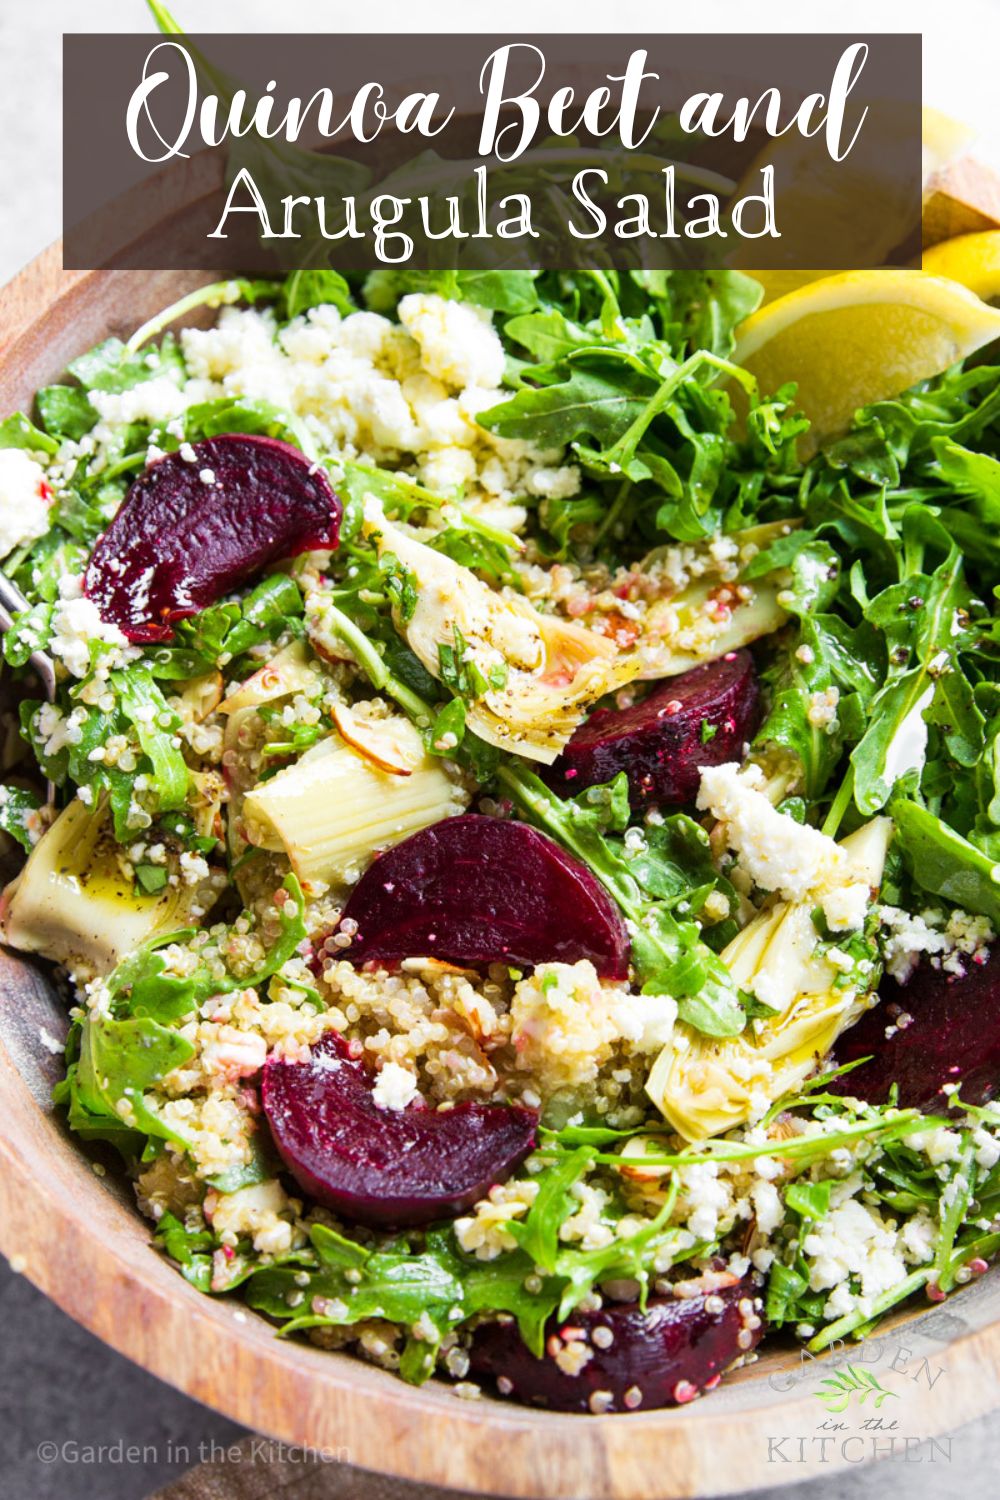 Quinoa salad with beets, arugula and feta cheese, served in a round wooden bowl. 